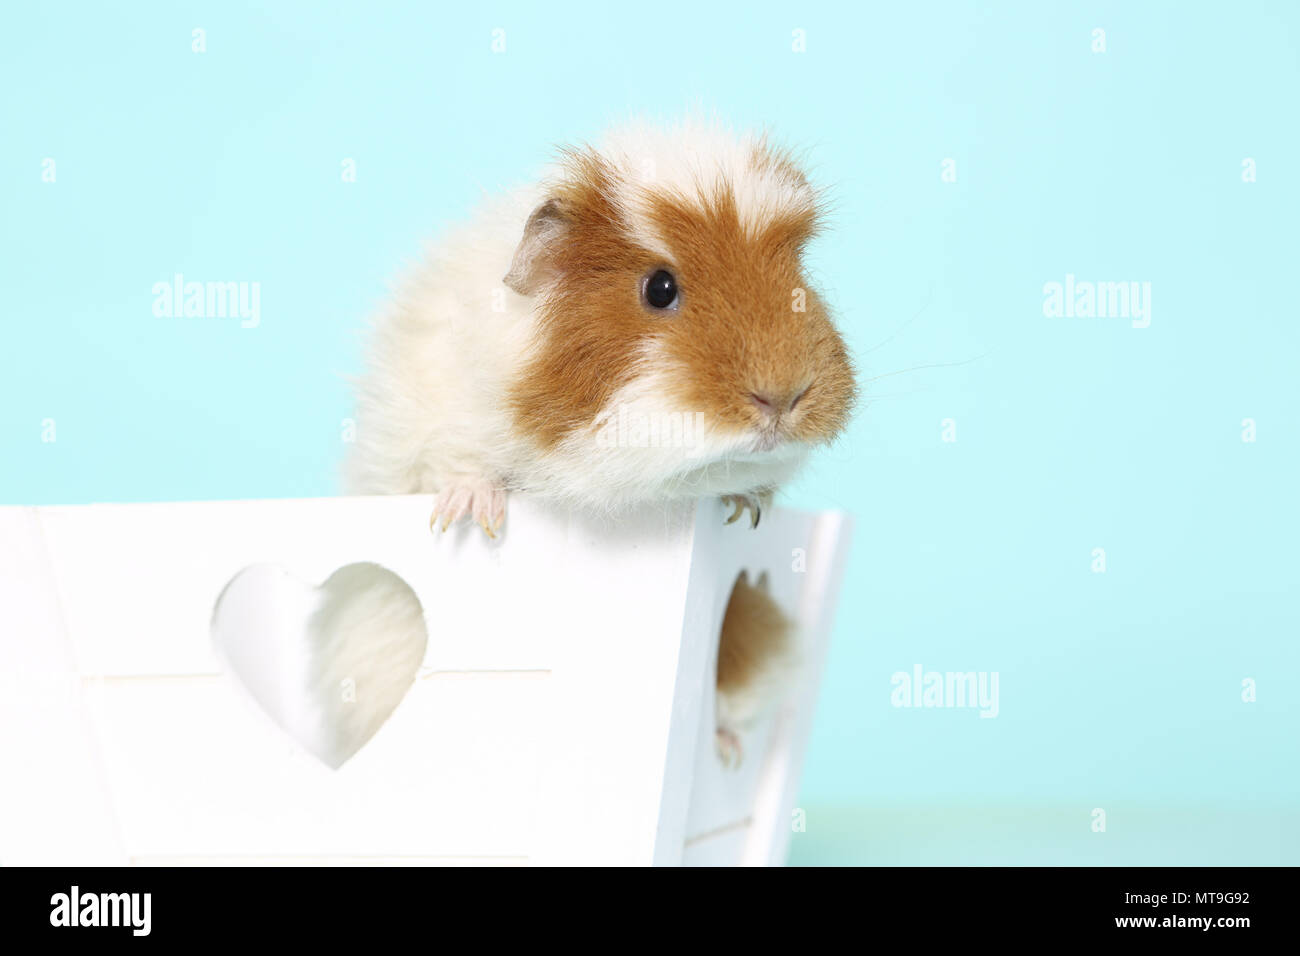 US-Teddy Guinea Pig in a little white box with heart-shaped holes. Studio picture against a light blue background Stock Photo